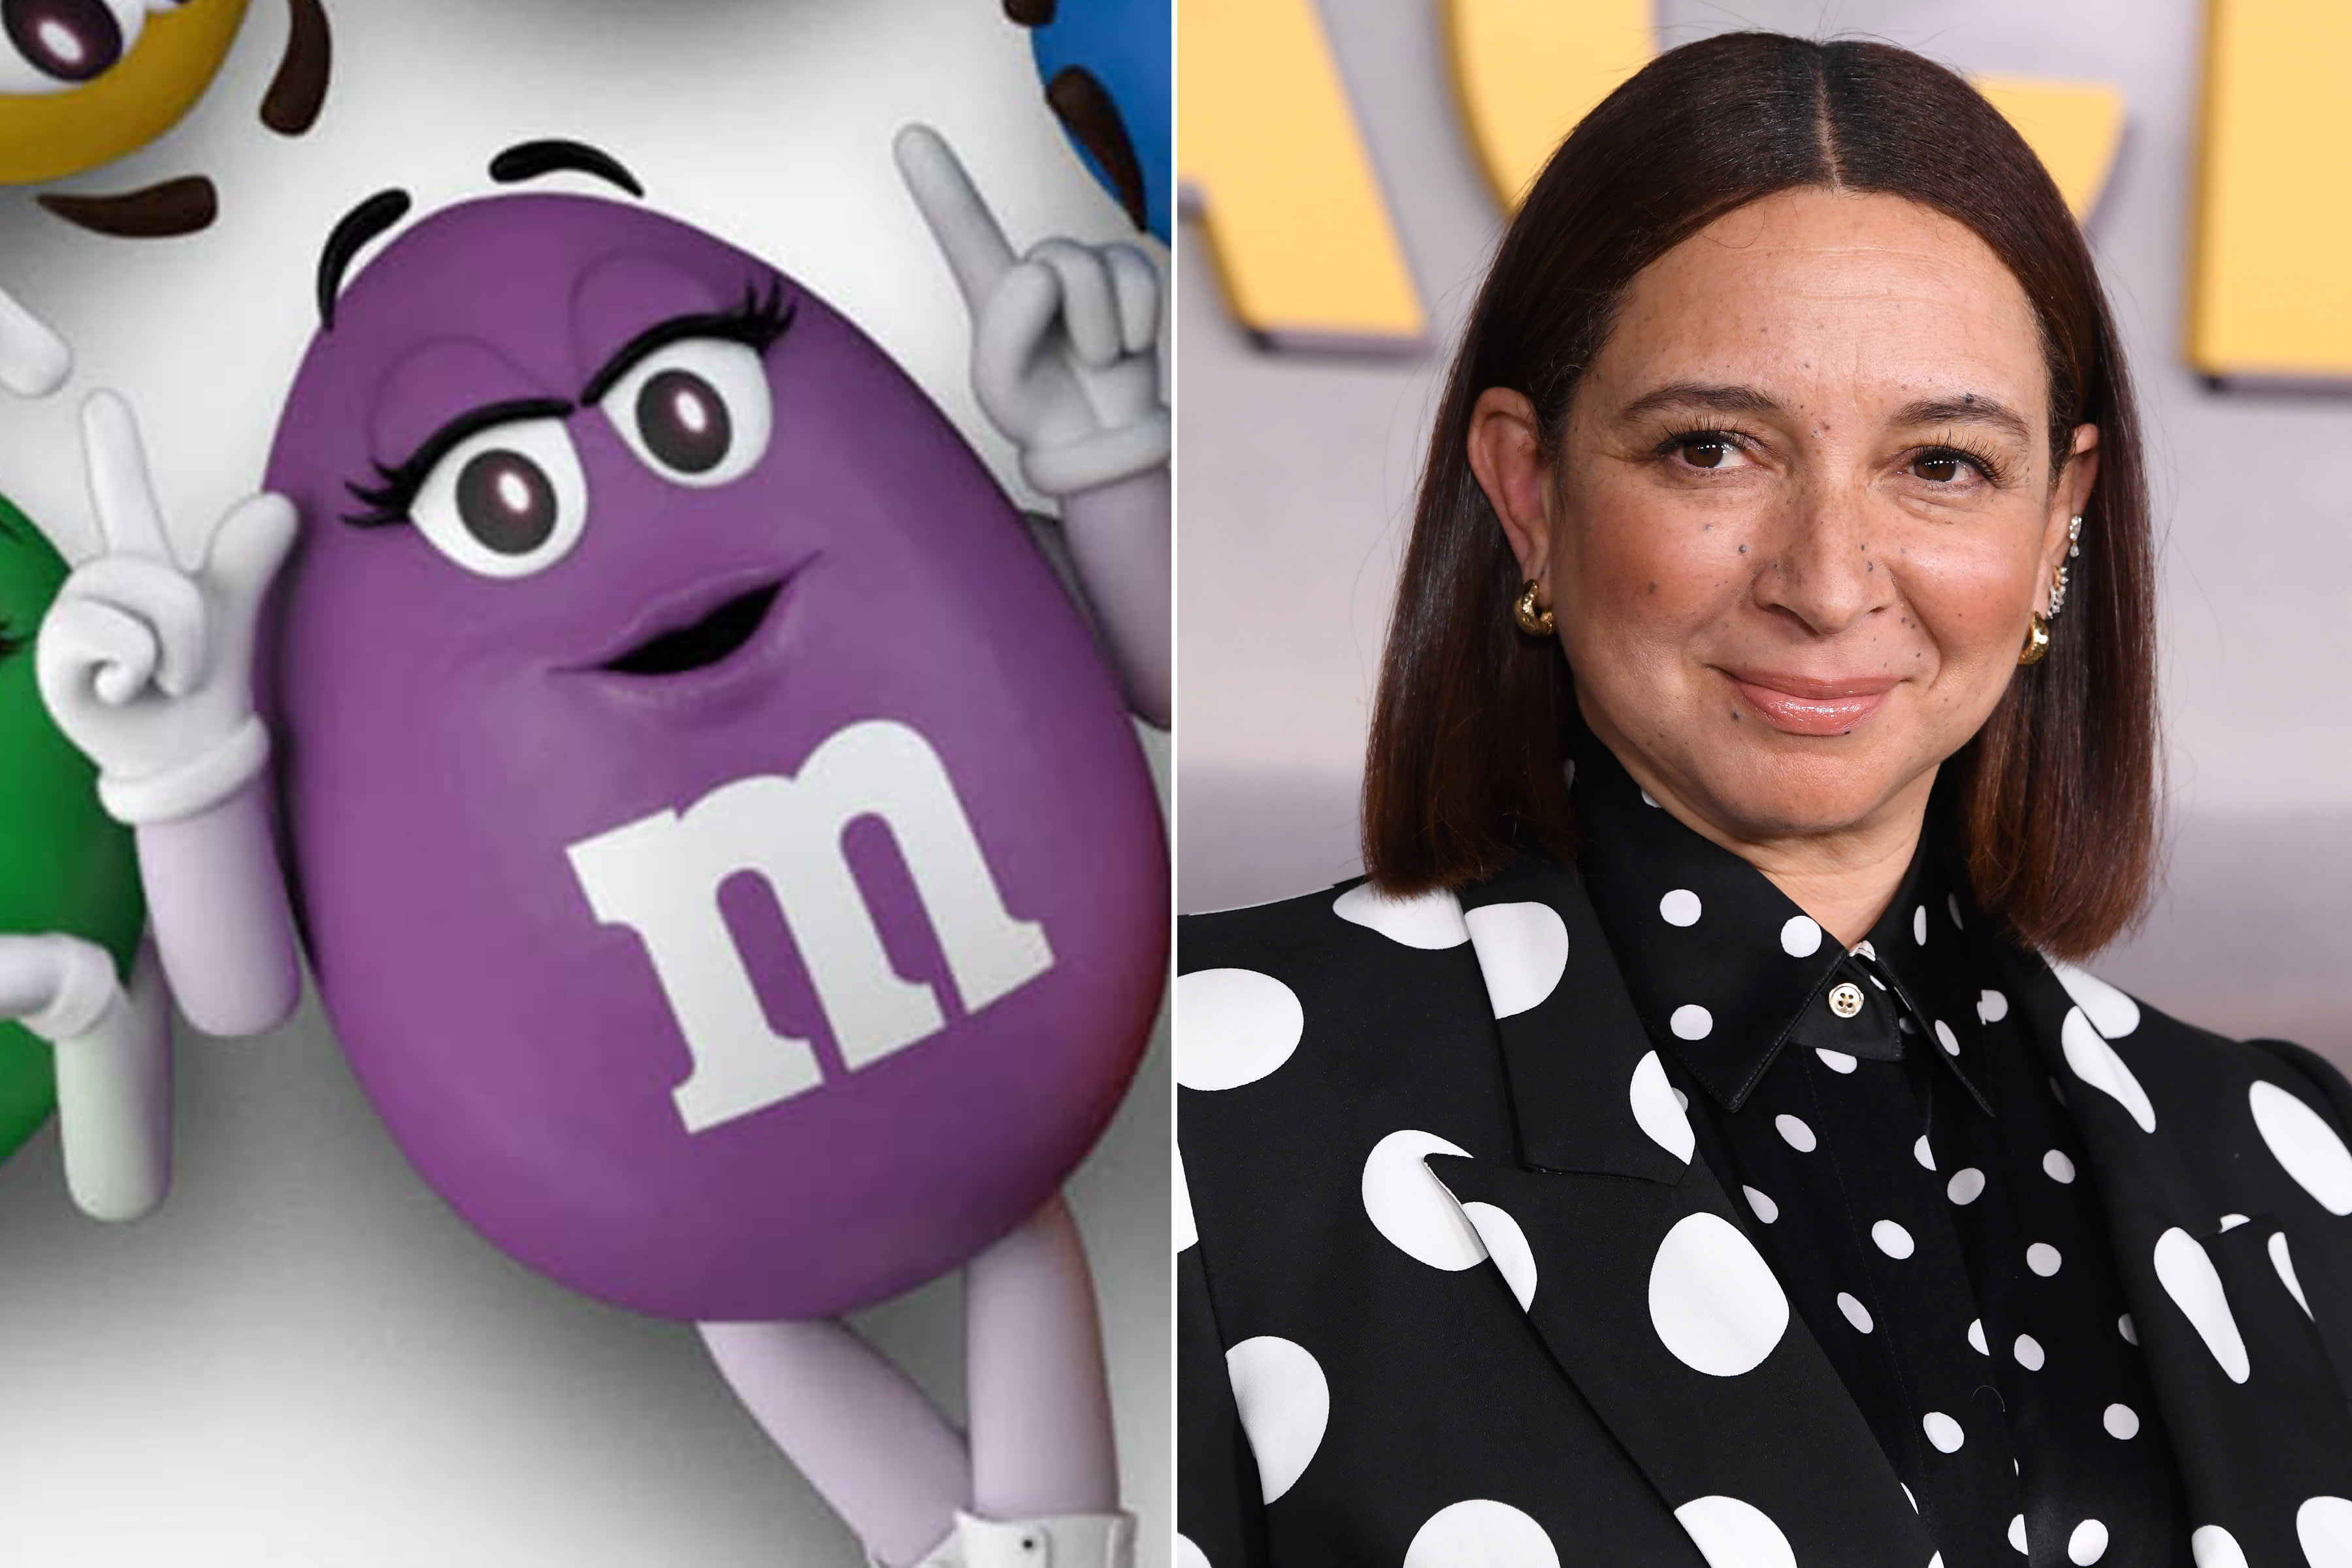 Fans will flip over new packs of M&M's candy that celebrate women